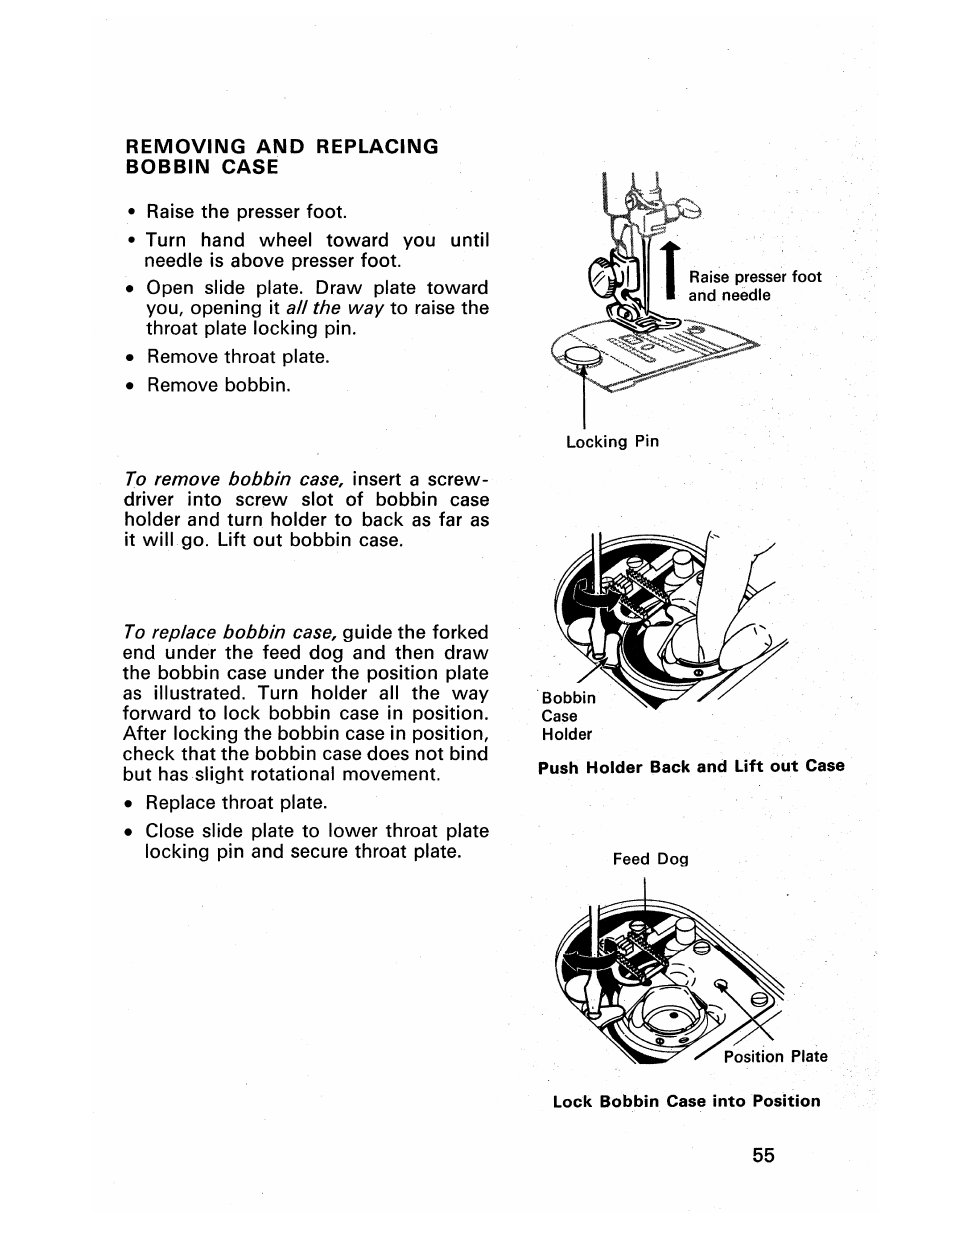 Removing and replacing, Bobbin case | SINGER 413 User Manual | Page 57 / 64